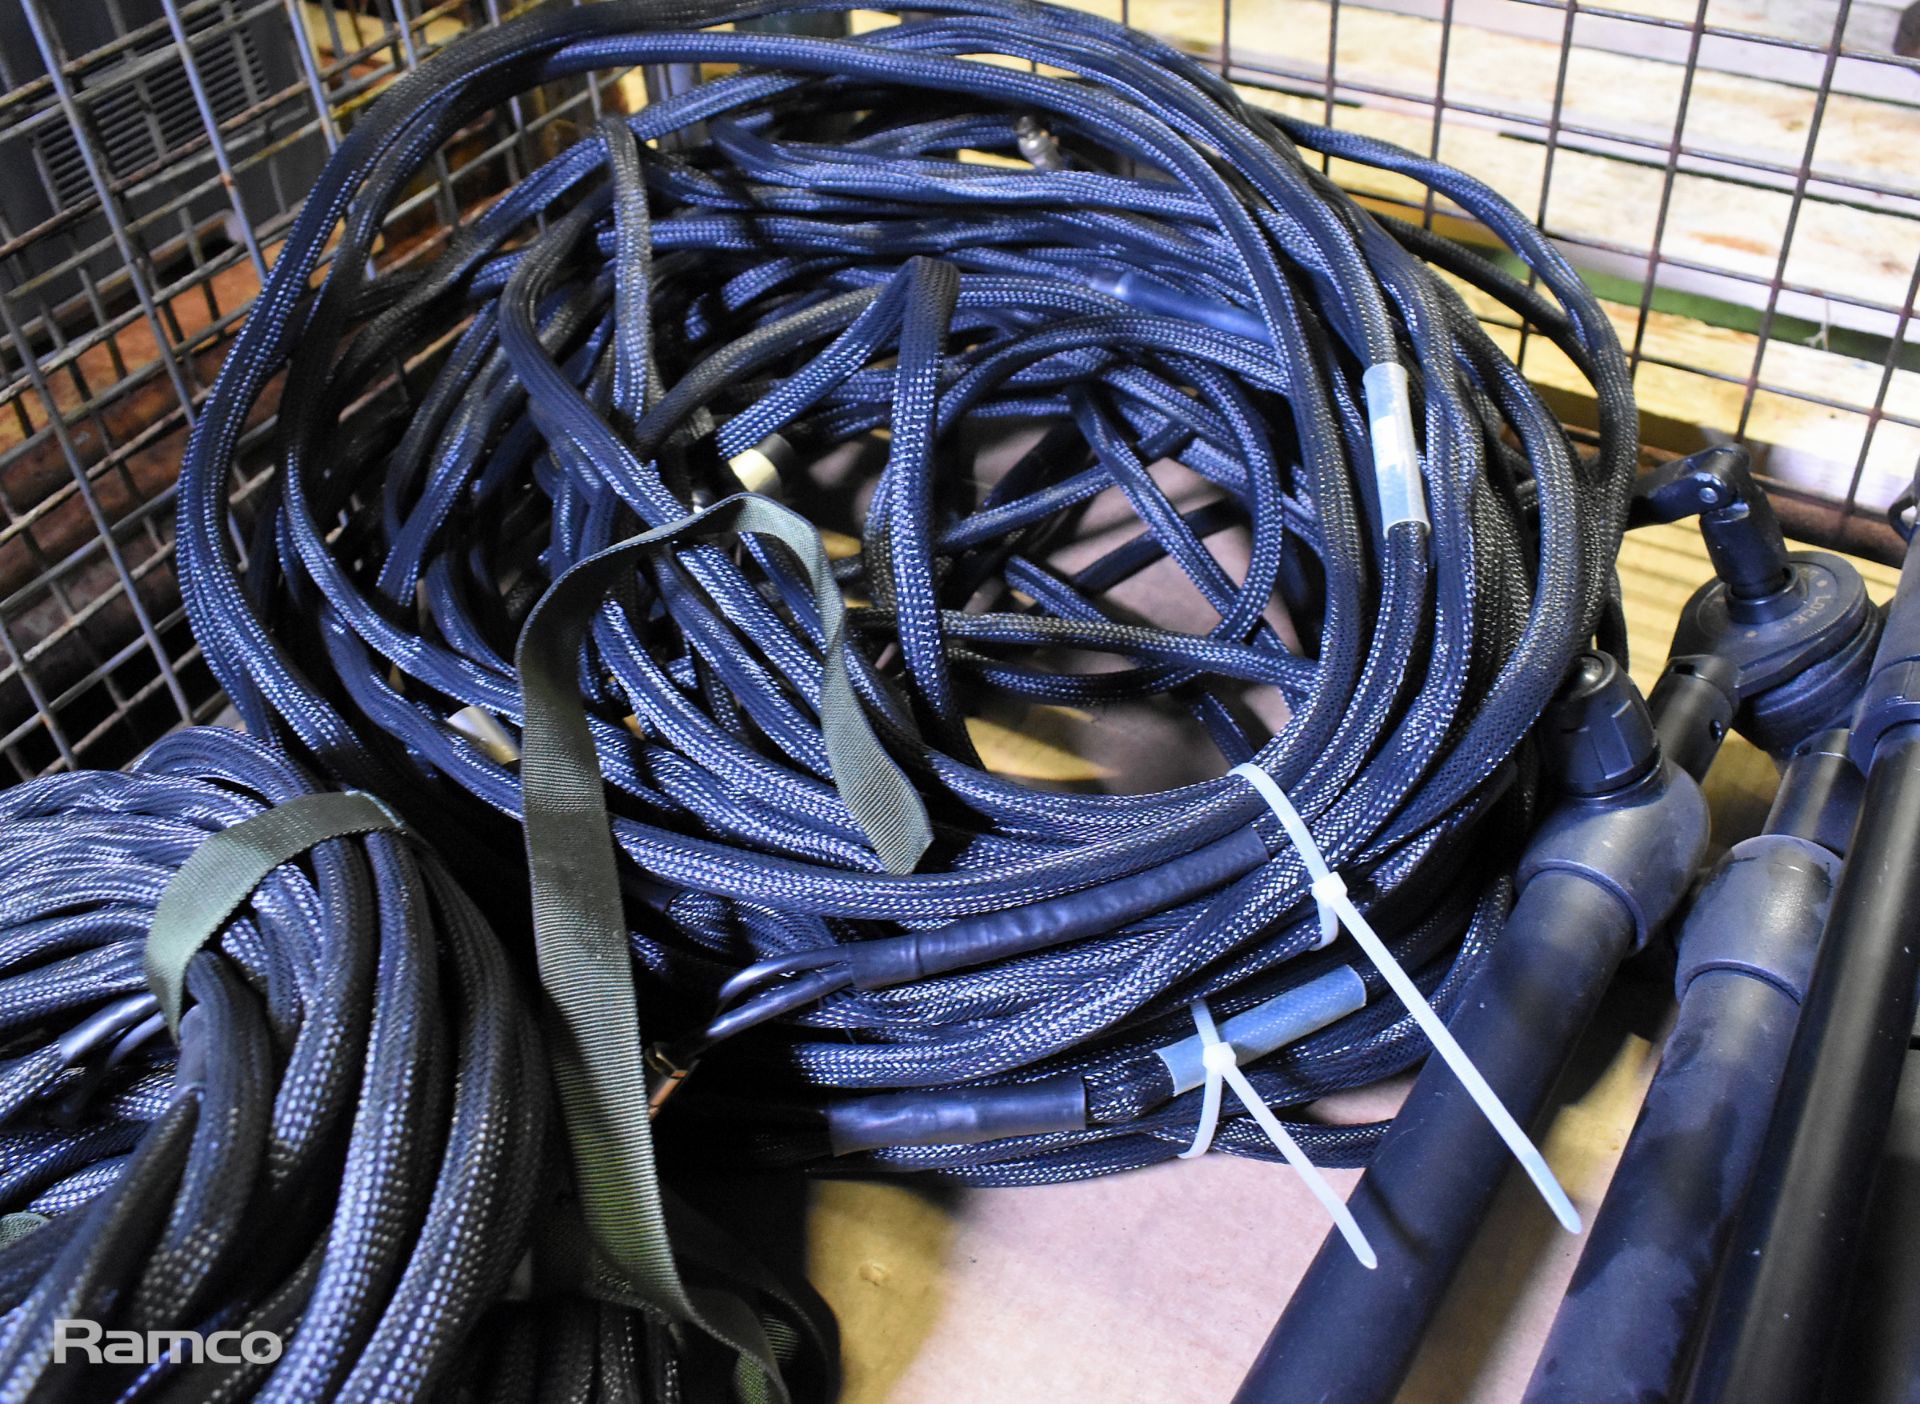 Photography equipment - 4x camera tripods and 4x audio/visual cables (approx 20m each) - Image 3 of 7